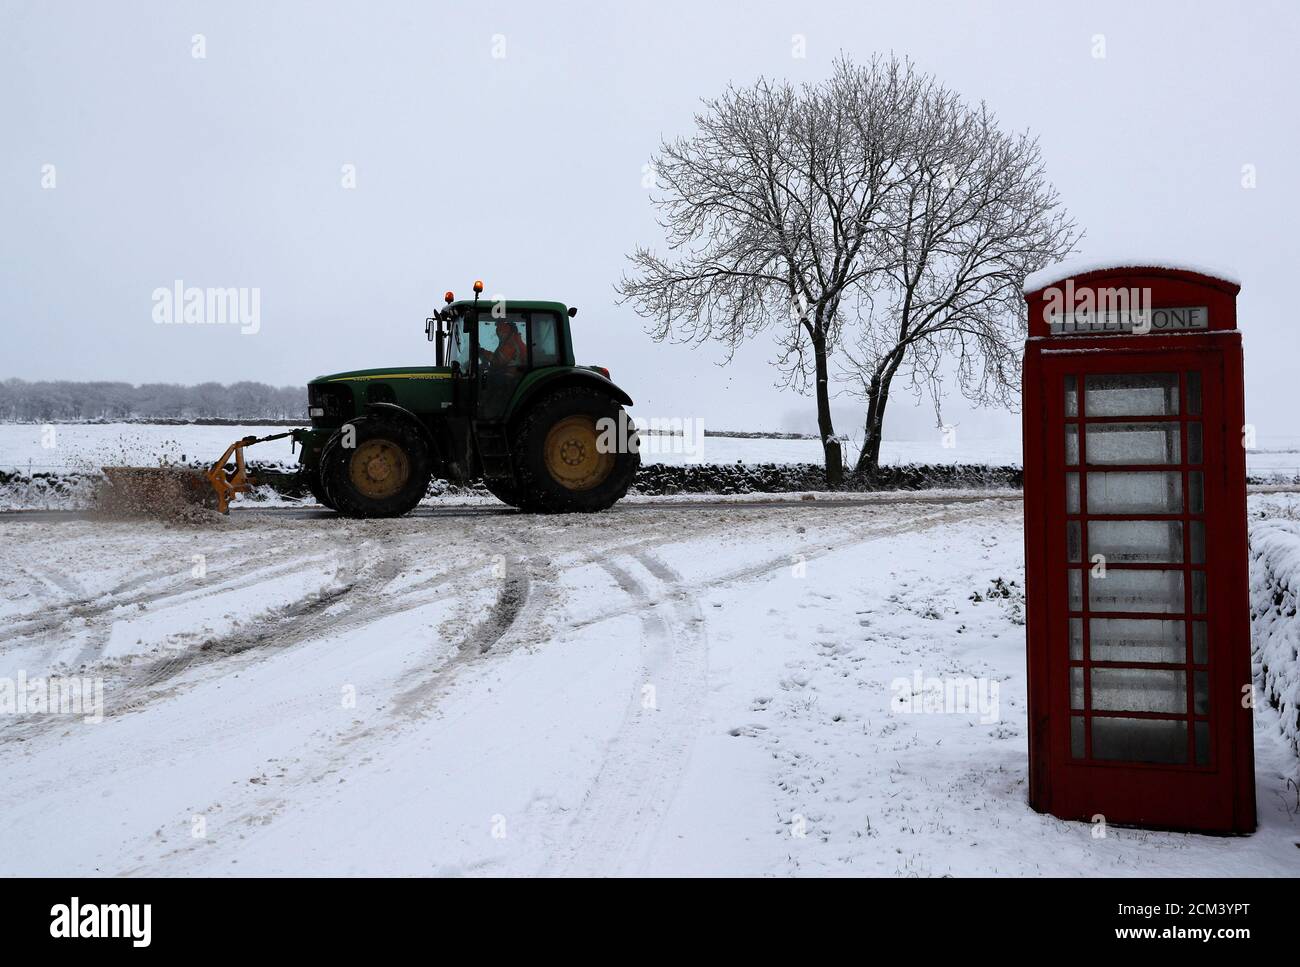 A tractor with a snow plough clears the A515 near Buxton, Britain December 29, 2017. REUTERS/Darren Staples Stock Photo